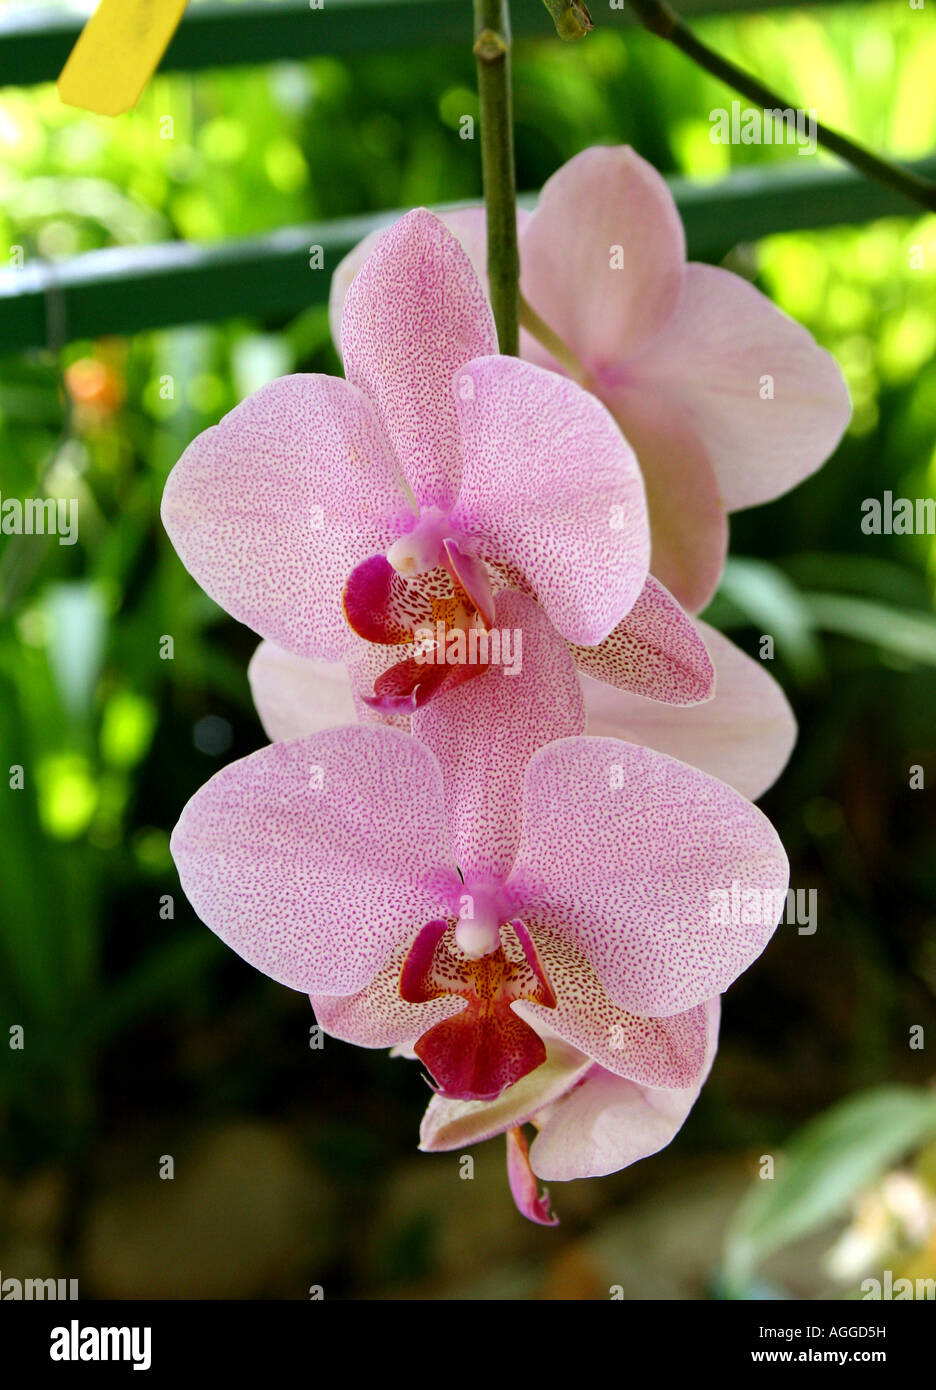 Phalaenopsis orchids of dotted pink type Stock Photo